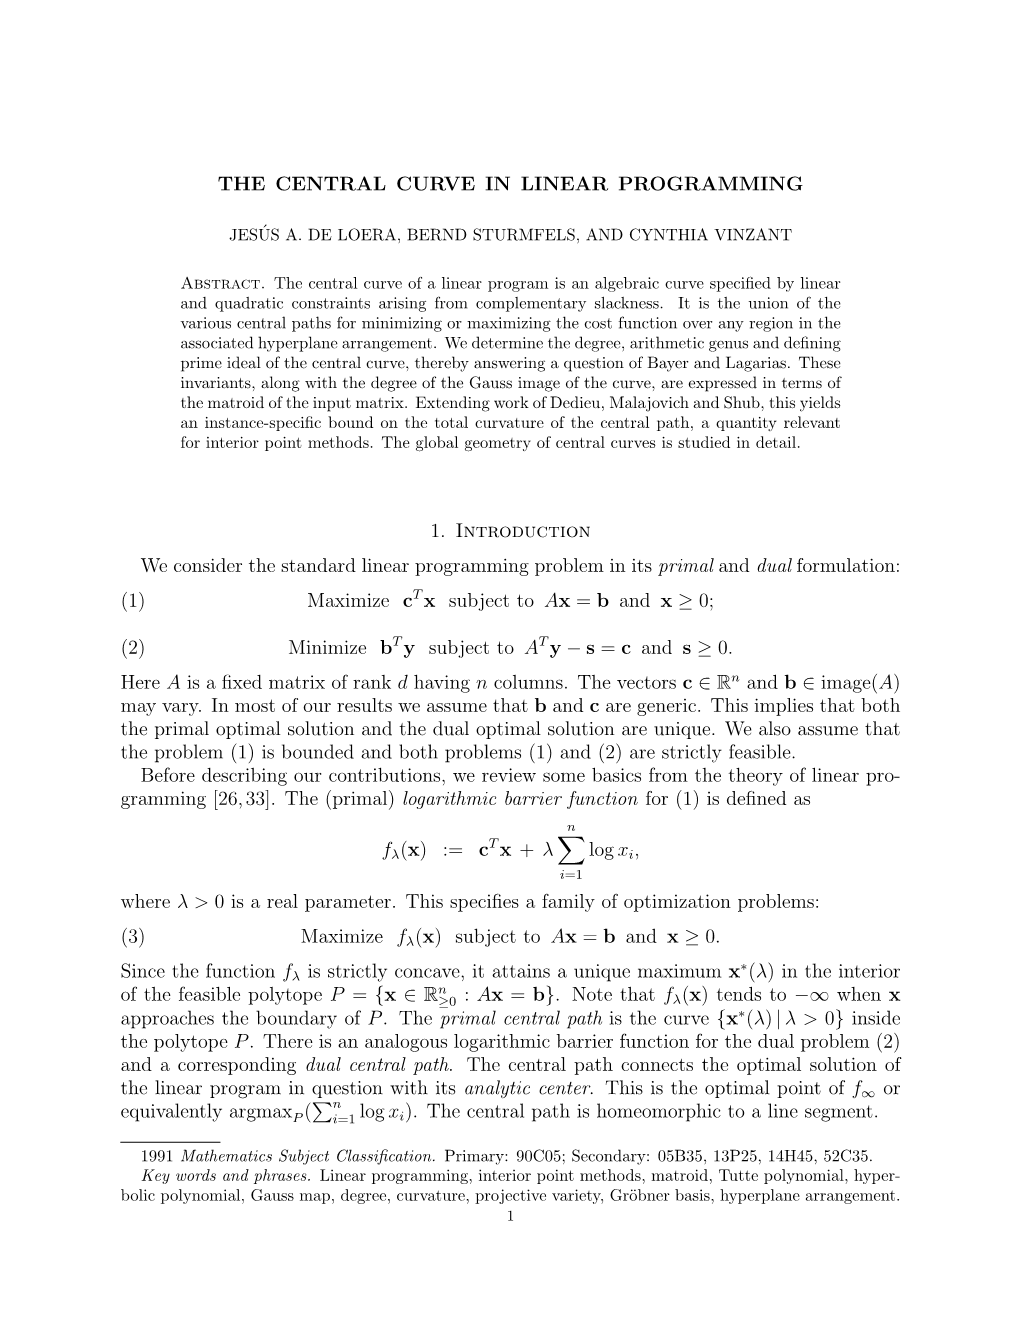 The Central Curve in Linear Programming